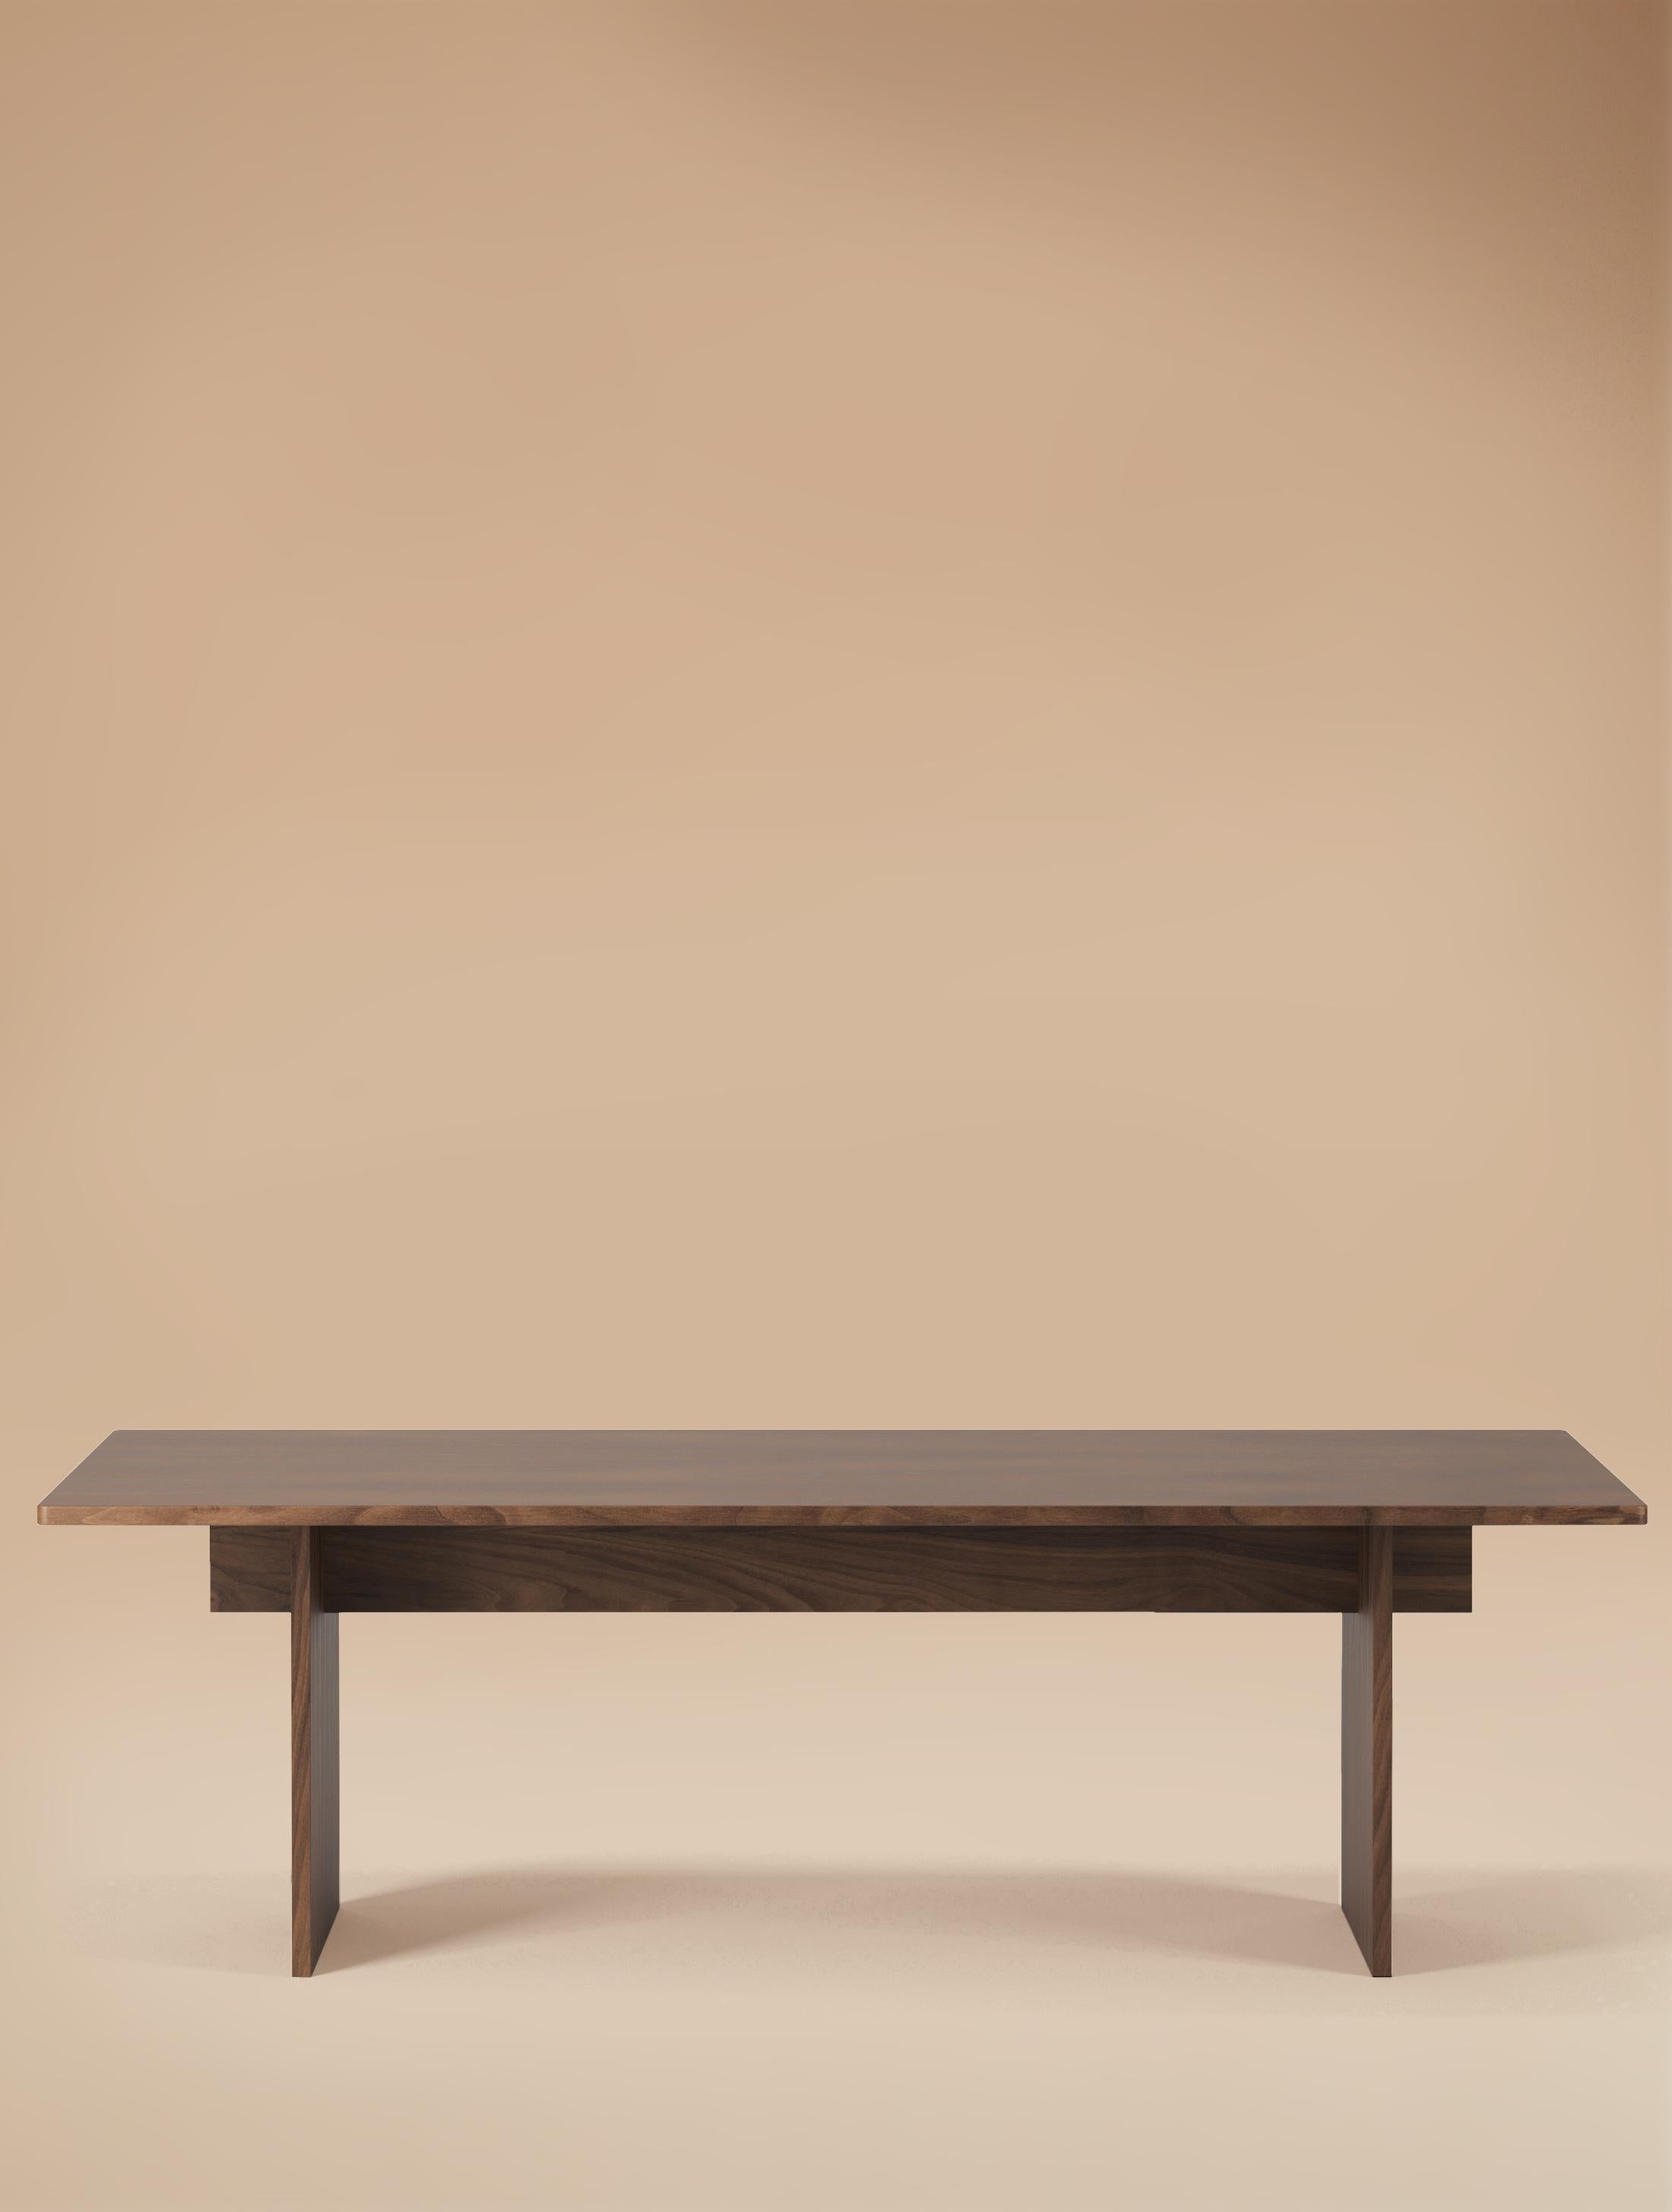 6 Seater Faure Table Handcrafted in Oak by Kevin Frankental 8